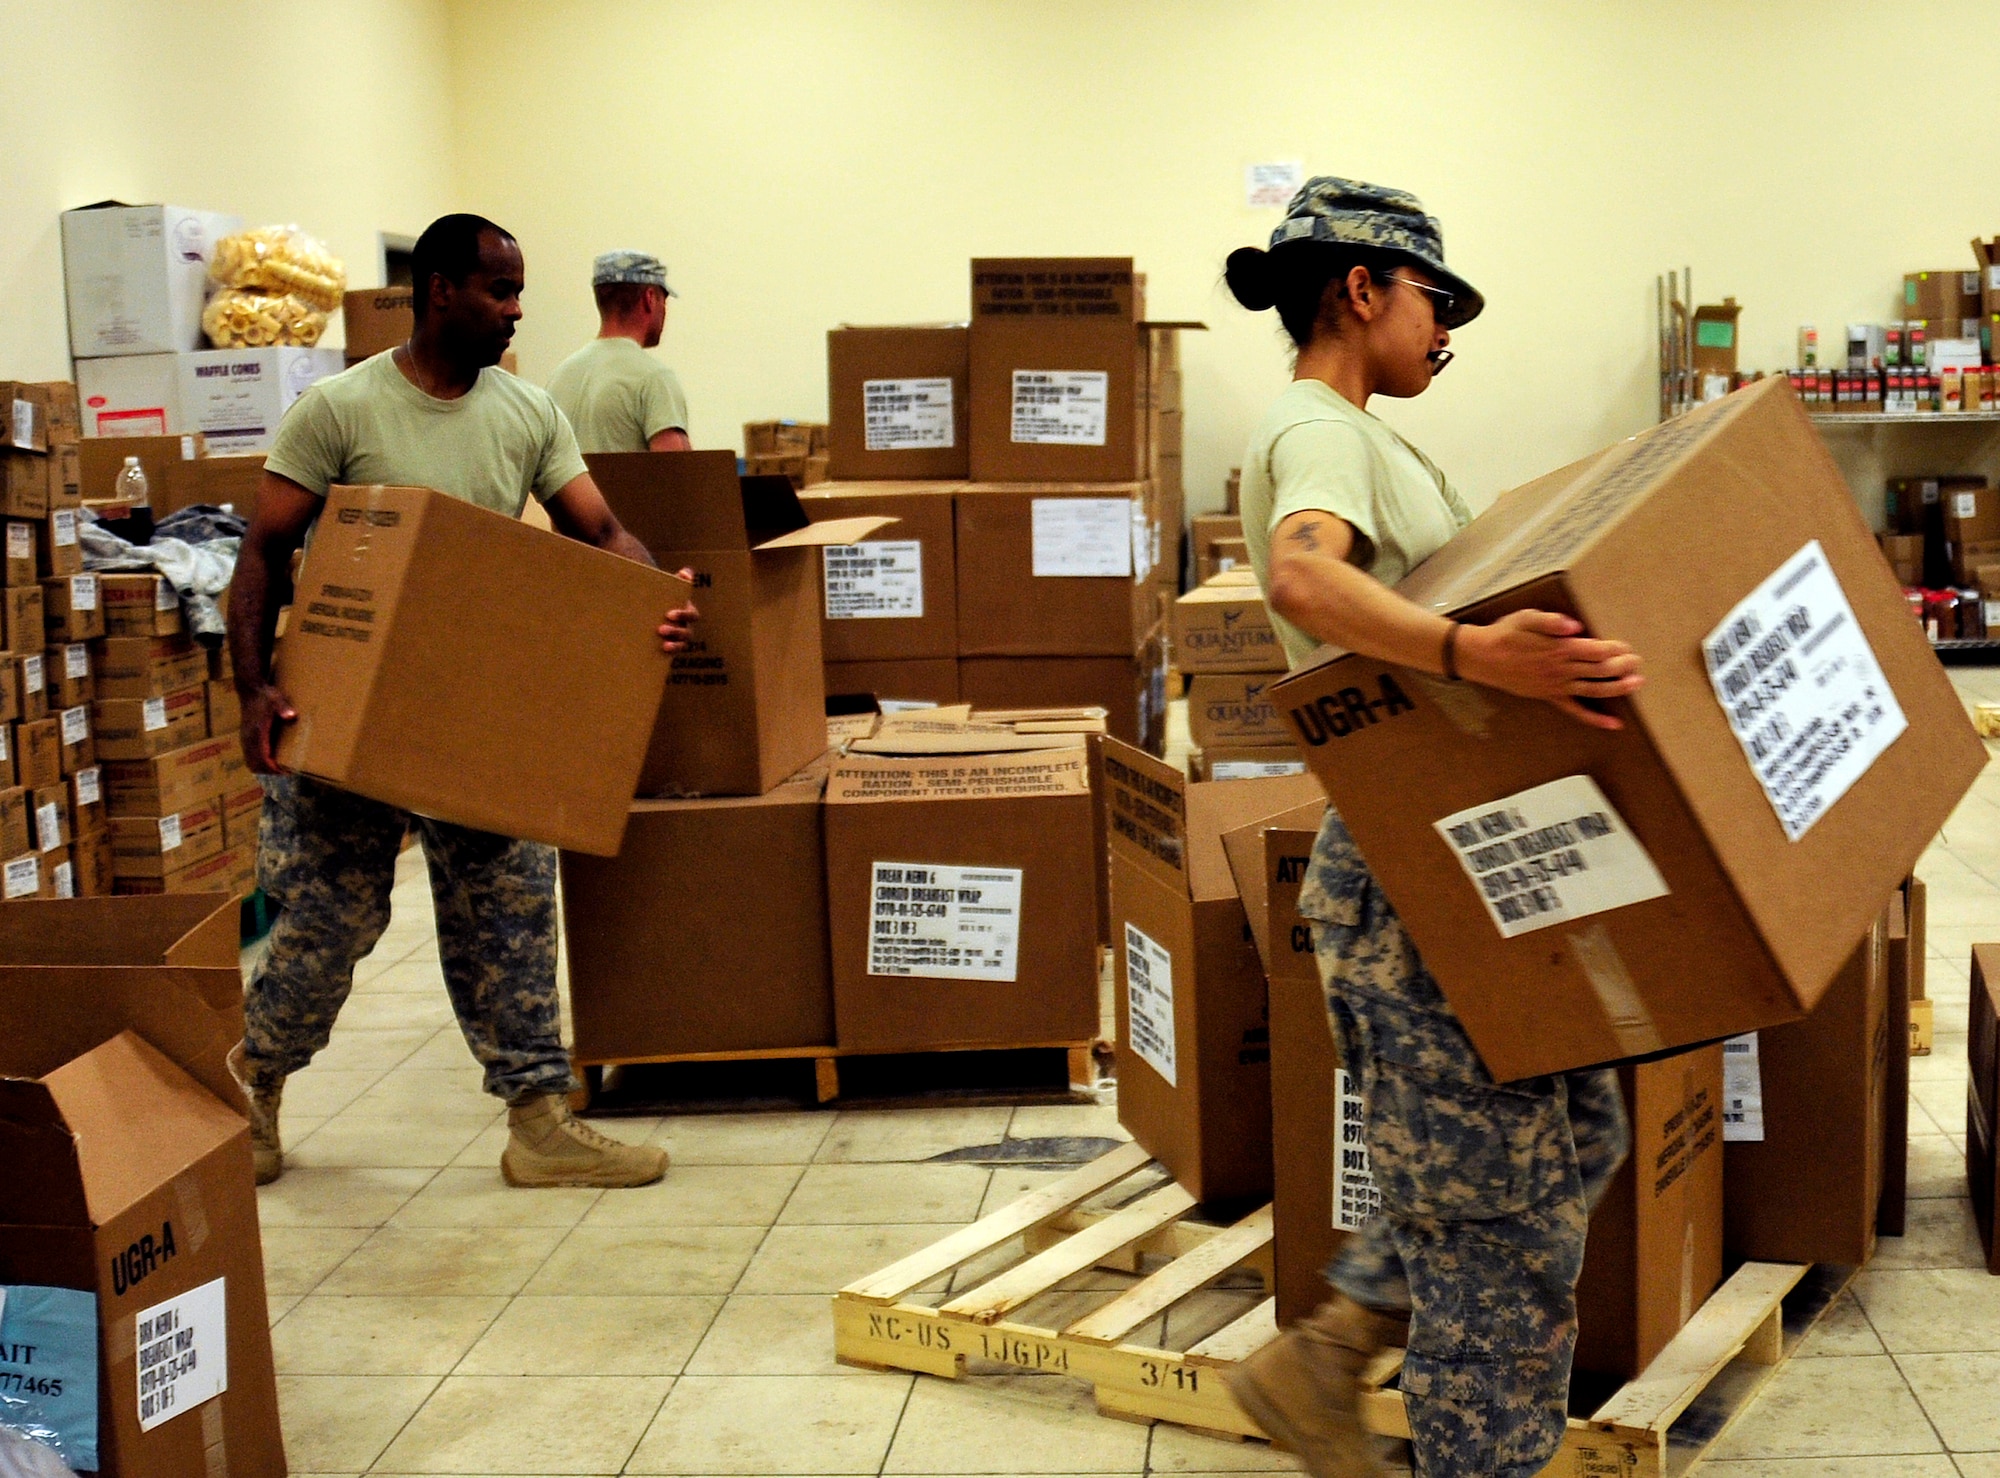 Army Spc. Marisol Landin, health care specialist, right, Staff Sgt. Christopher Middlebrooks, laundry and showers NCO, left, and Spc. Theodore Gigrich, wheeled vehicle mechanic, organize boxes of food at the dining facility at Joint Base Balad, Iraq, Oct. 15, 2011.  With the release of food services contractors, Airmen and soldiers joined together at the dining facility to feed the troops during the closure of JB Balad.    JB Balad has disassembled units, turned in equipment, and shut down services to transition the base to the Iraqi government. Landin is deployed from Fort Hood, Texas, and is from Jacksonville, Texas.  Middlebrooks is deployed from Joint Base McGuire-Dix-Lakehurst, N.J., and is from Edgewater Park, N.J. Gigrich is deployed from Fort Hood and is from Kalispell, Mont.  (U.S. Air Force photo/Master Sgt. Cecilio Ricardo)